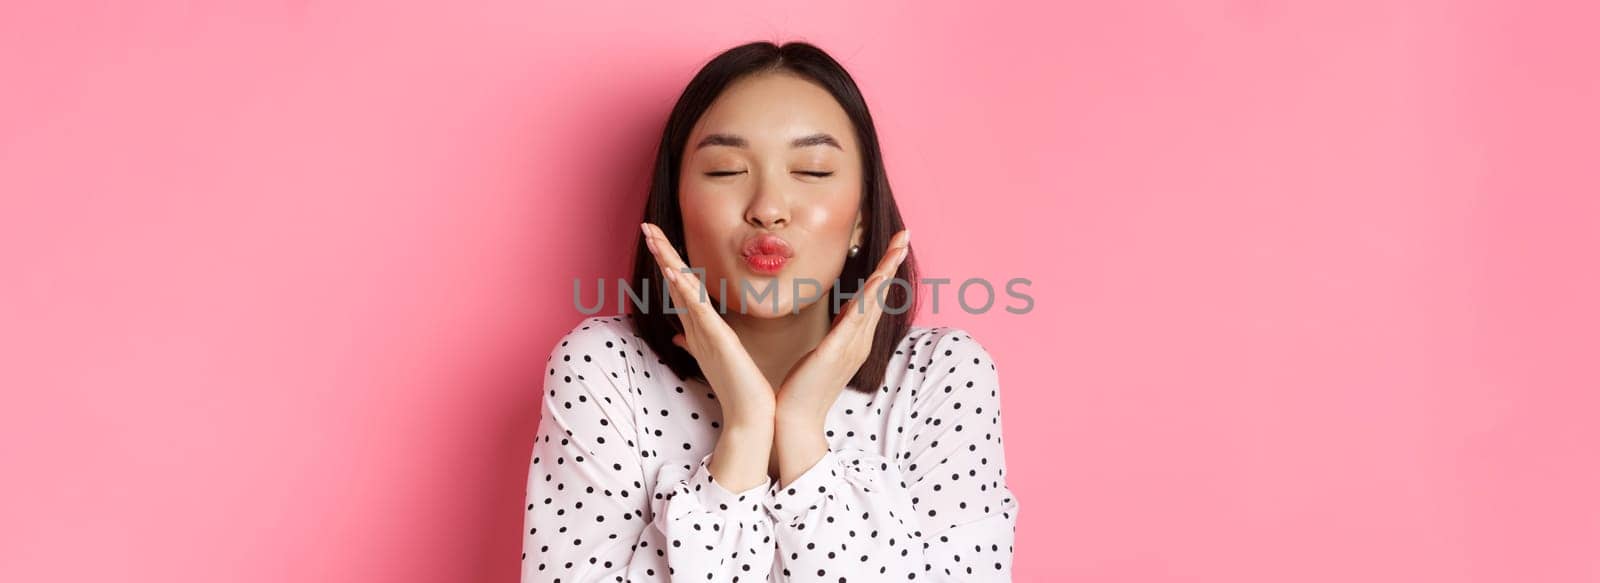 Beauty and skin care concept. Close-up of beautiful asian girl close eyes, pucker lips for kisses, showing cute perfect face, standing over pink background.